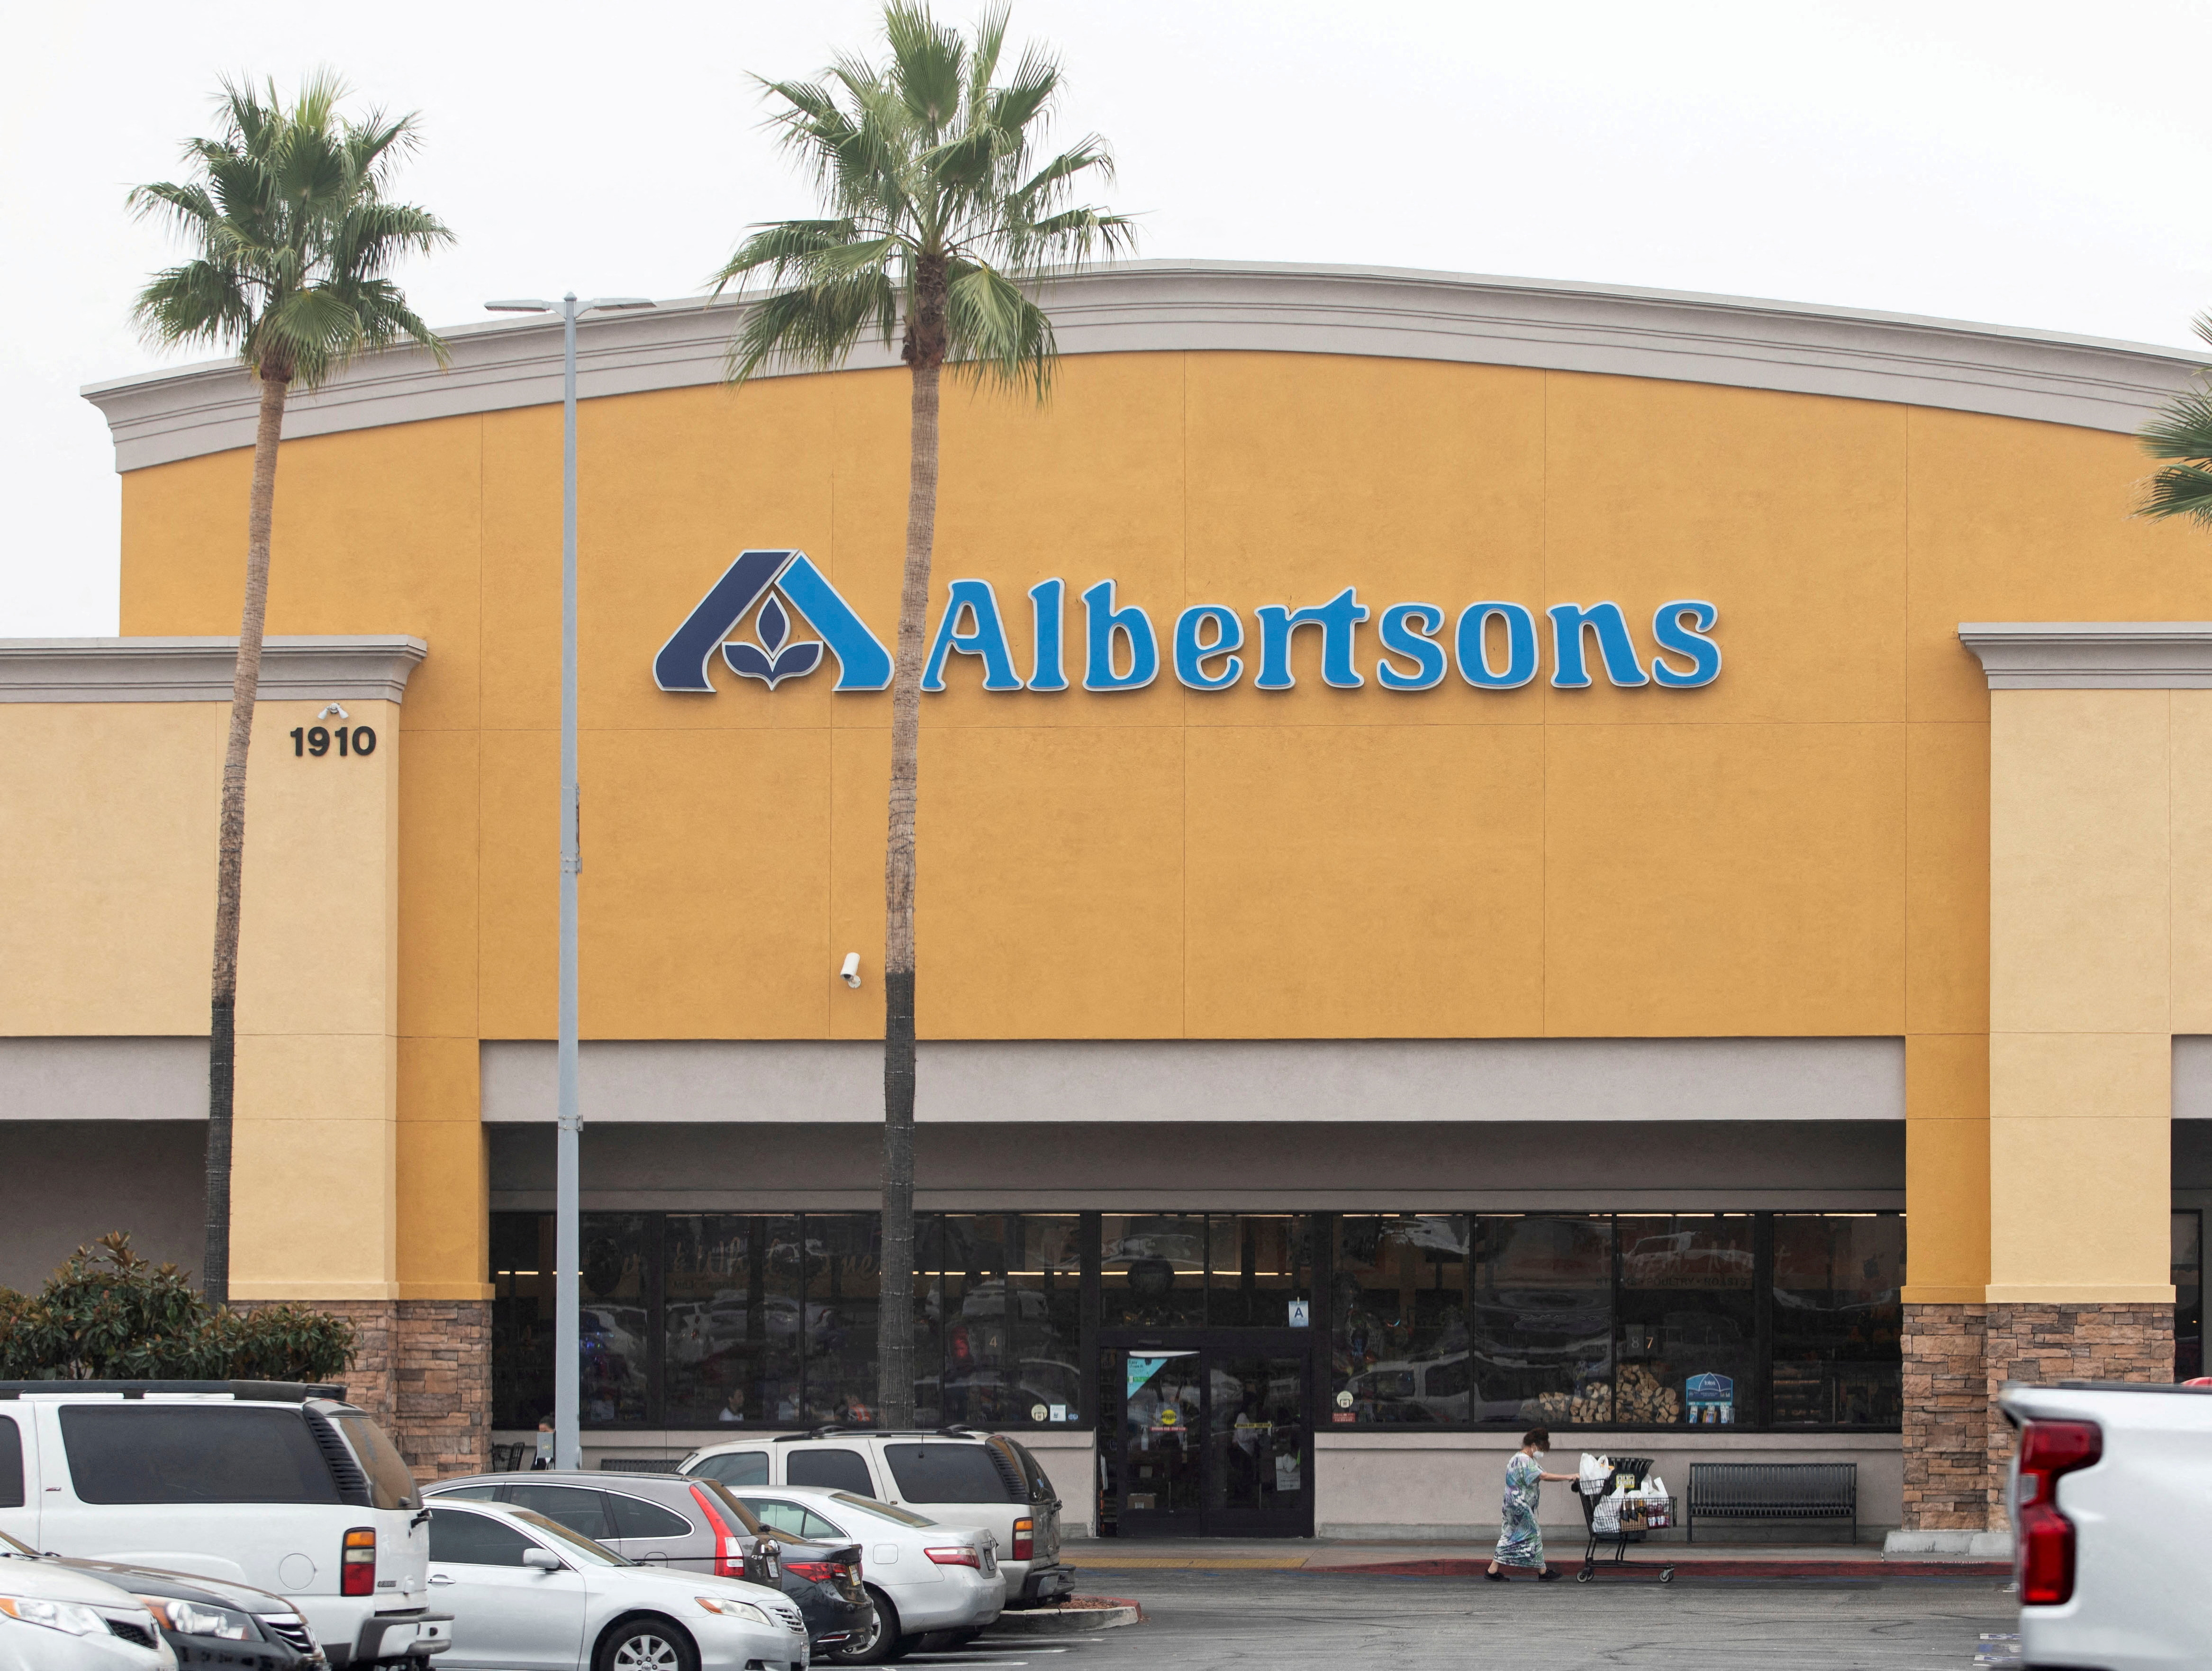 A customer leaves an Albertsons grocery store in Riverside